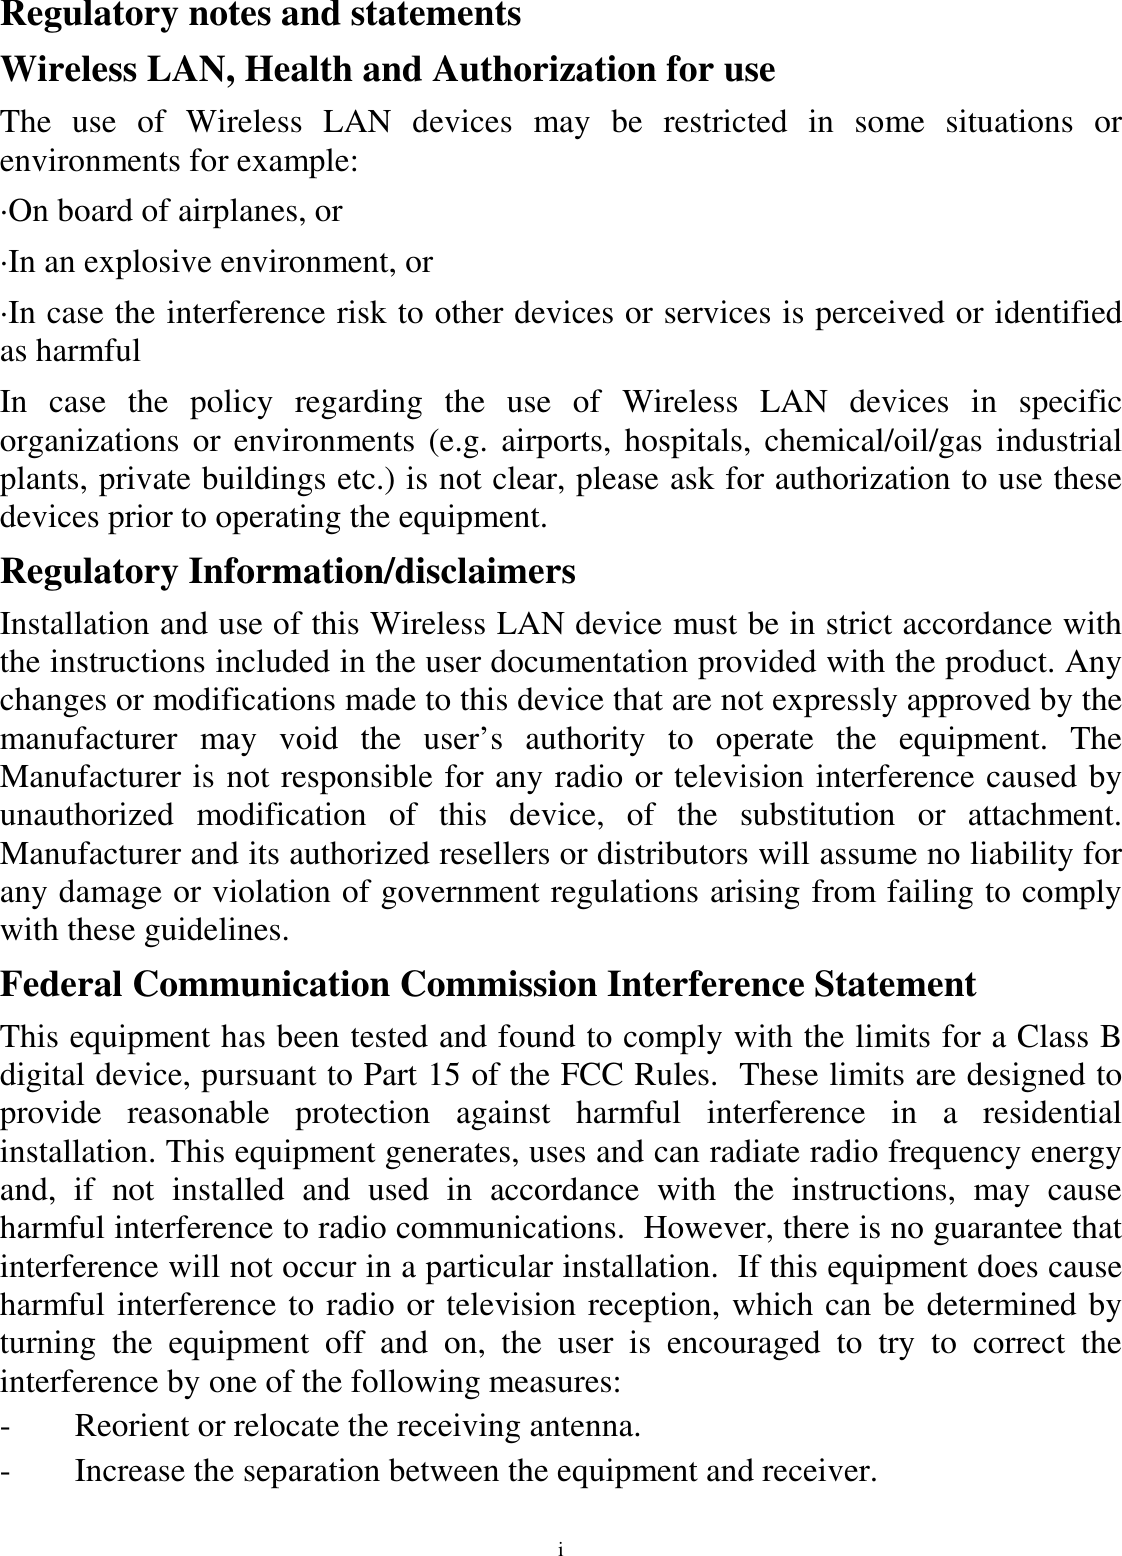 i Regulatory notes and statements Wireless LAN, Health and Authorization for use The  use  of  Wireless  LAN  devices  may  be  restricted  in  some  situations  or environments for example: ·On board of airplanes, or ·In an explosive environment, or ·In case the interference risk to other devices or services is perceived or identified as harmful In  case  the  policy  regarding  the  use  of  Wireless  LAN  devices  in  specific organizations or  environments (e.g.  airports,  hospitals,  chemical/oil/gas industrial plants, private buildings etc.) is not clear, please ask for authorization to use these devices prior to operating the equipment. Regulatory Information/disclaimers Installation and use of this Wireless LAN device must be in strict accordance with the instructions included in the user documentation provided with the product. Any changes or modifications made to this device that are not expressly approved by the manufacturer  may  void  the  user’s  authority  to  operate  the  equipment.  The Manufacturer is not responsible for any radio or television interference caused by unauthorized  modification  of  this  device,  of  the  substitution  or  attachment. Manufacturer and its authorized resellers or distributors will assume no liability for any damage or violation of government regulations arising from failing to comply with these guidelines. Federal Communication Commission Interference Statement This equipment has been tested and found to comply with the limits for a Class B digital device, pursuant to Part 15 of the FCC Rules.  These limits are designed to provide  reasonable  protection  against  harmful  interference  in  a  residential installation. This equipment generates, uses and can radiate radio frequency energy and,  if  not  installed  and  used  in  accordance  with  the  instructions,  may  cause harmful interference to radio communications.  However, there is no guarantee that interference will not occur in a particular installation.  If this equipment does cause harmful interference to radio or television reception, which can be determined by turning  the  equipment  off  and  on,  the  user  is  encouraged  to  try  to  correct  the interference by one of the following measures: -  Reorient or relocate the receiving antenna. -  Increase the separation between the equipment and receiver. 